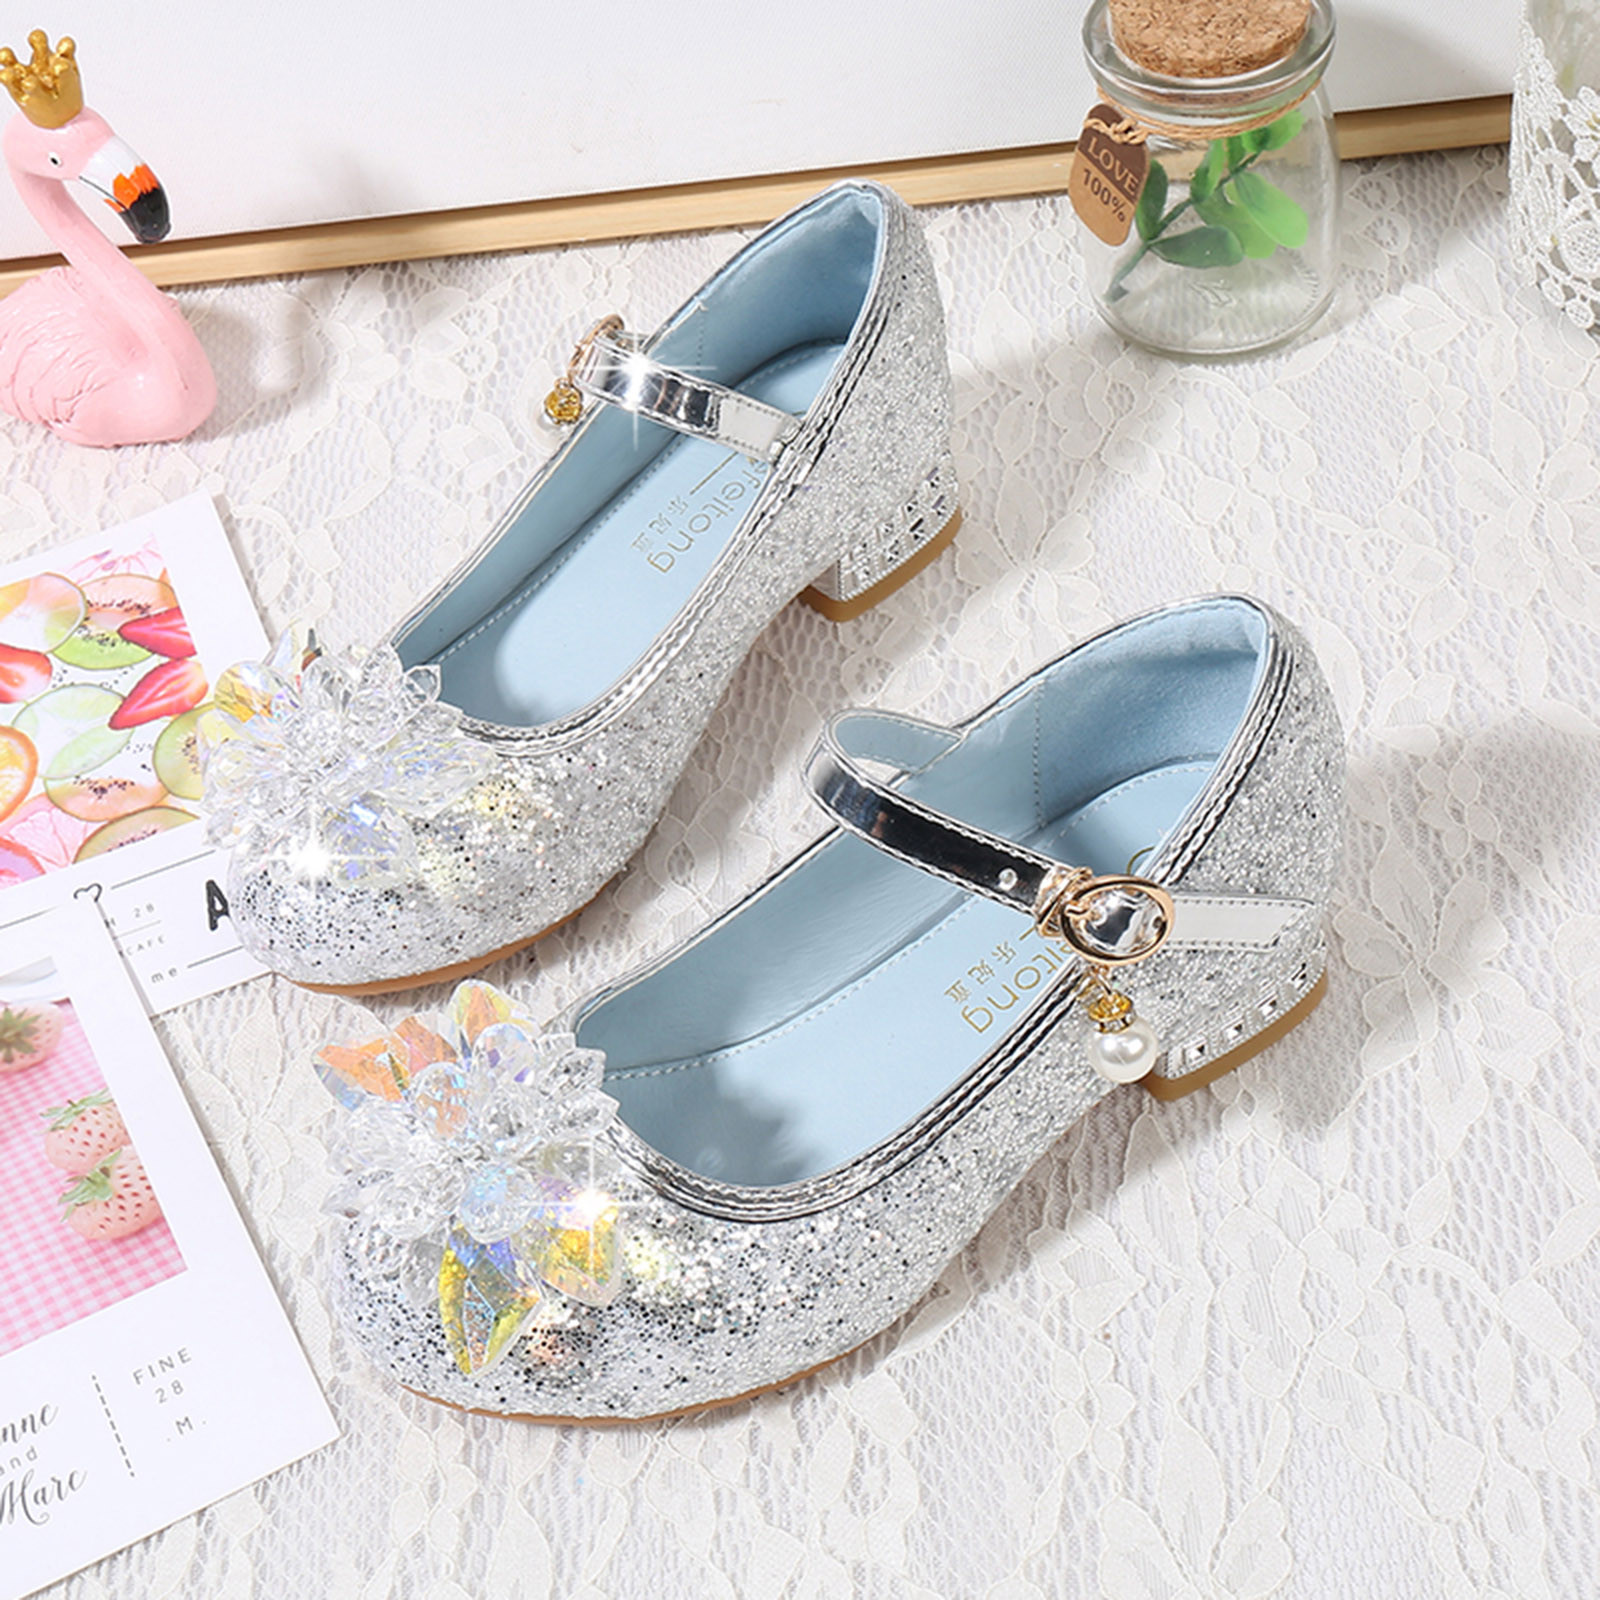 Youmylove Toddler Little Kid Girls Dress Pumps Glitter Sequins Princess Flower Low Heels Party Show Dance Shoes Rhinestone Sandals Children Casual Shoes - image 2 of 9